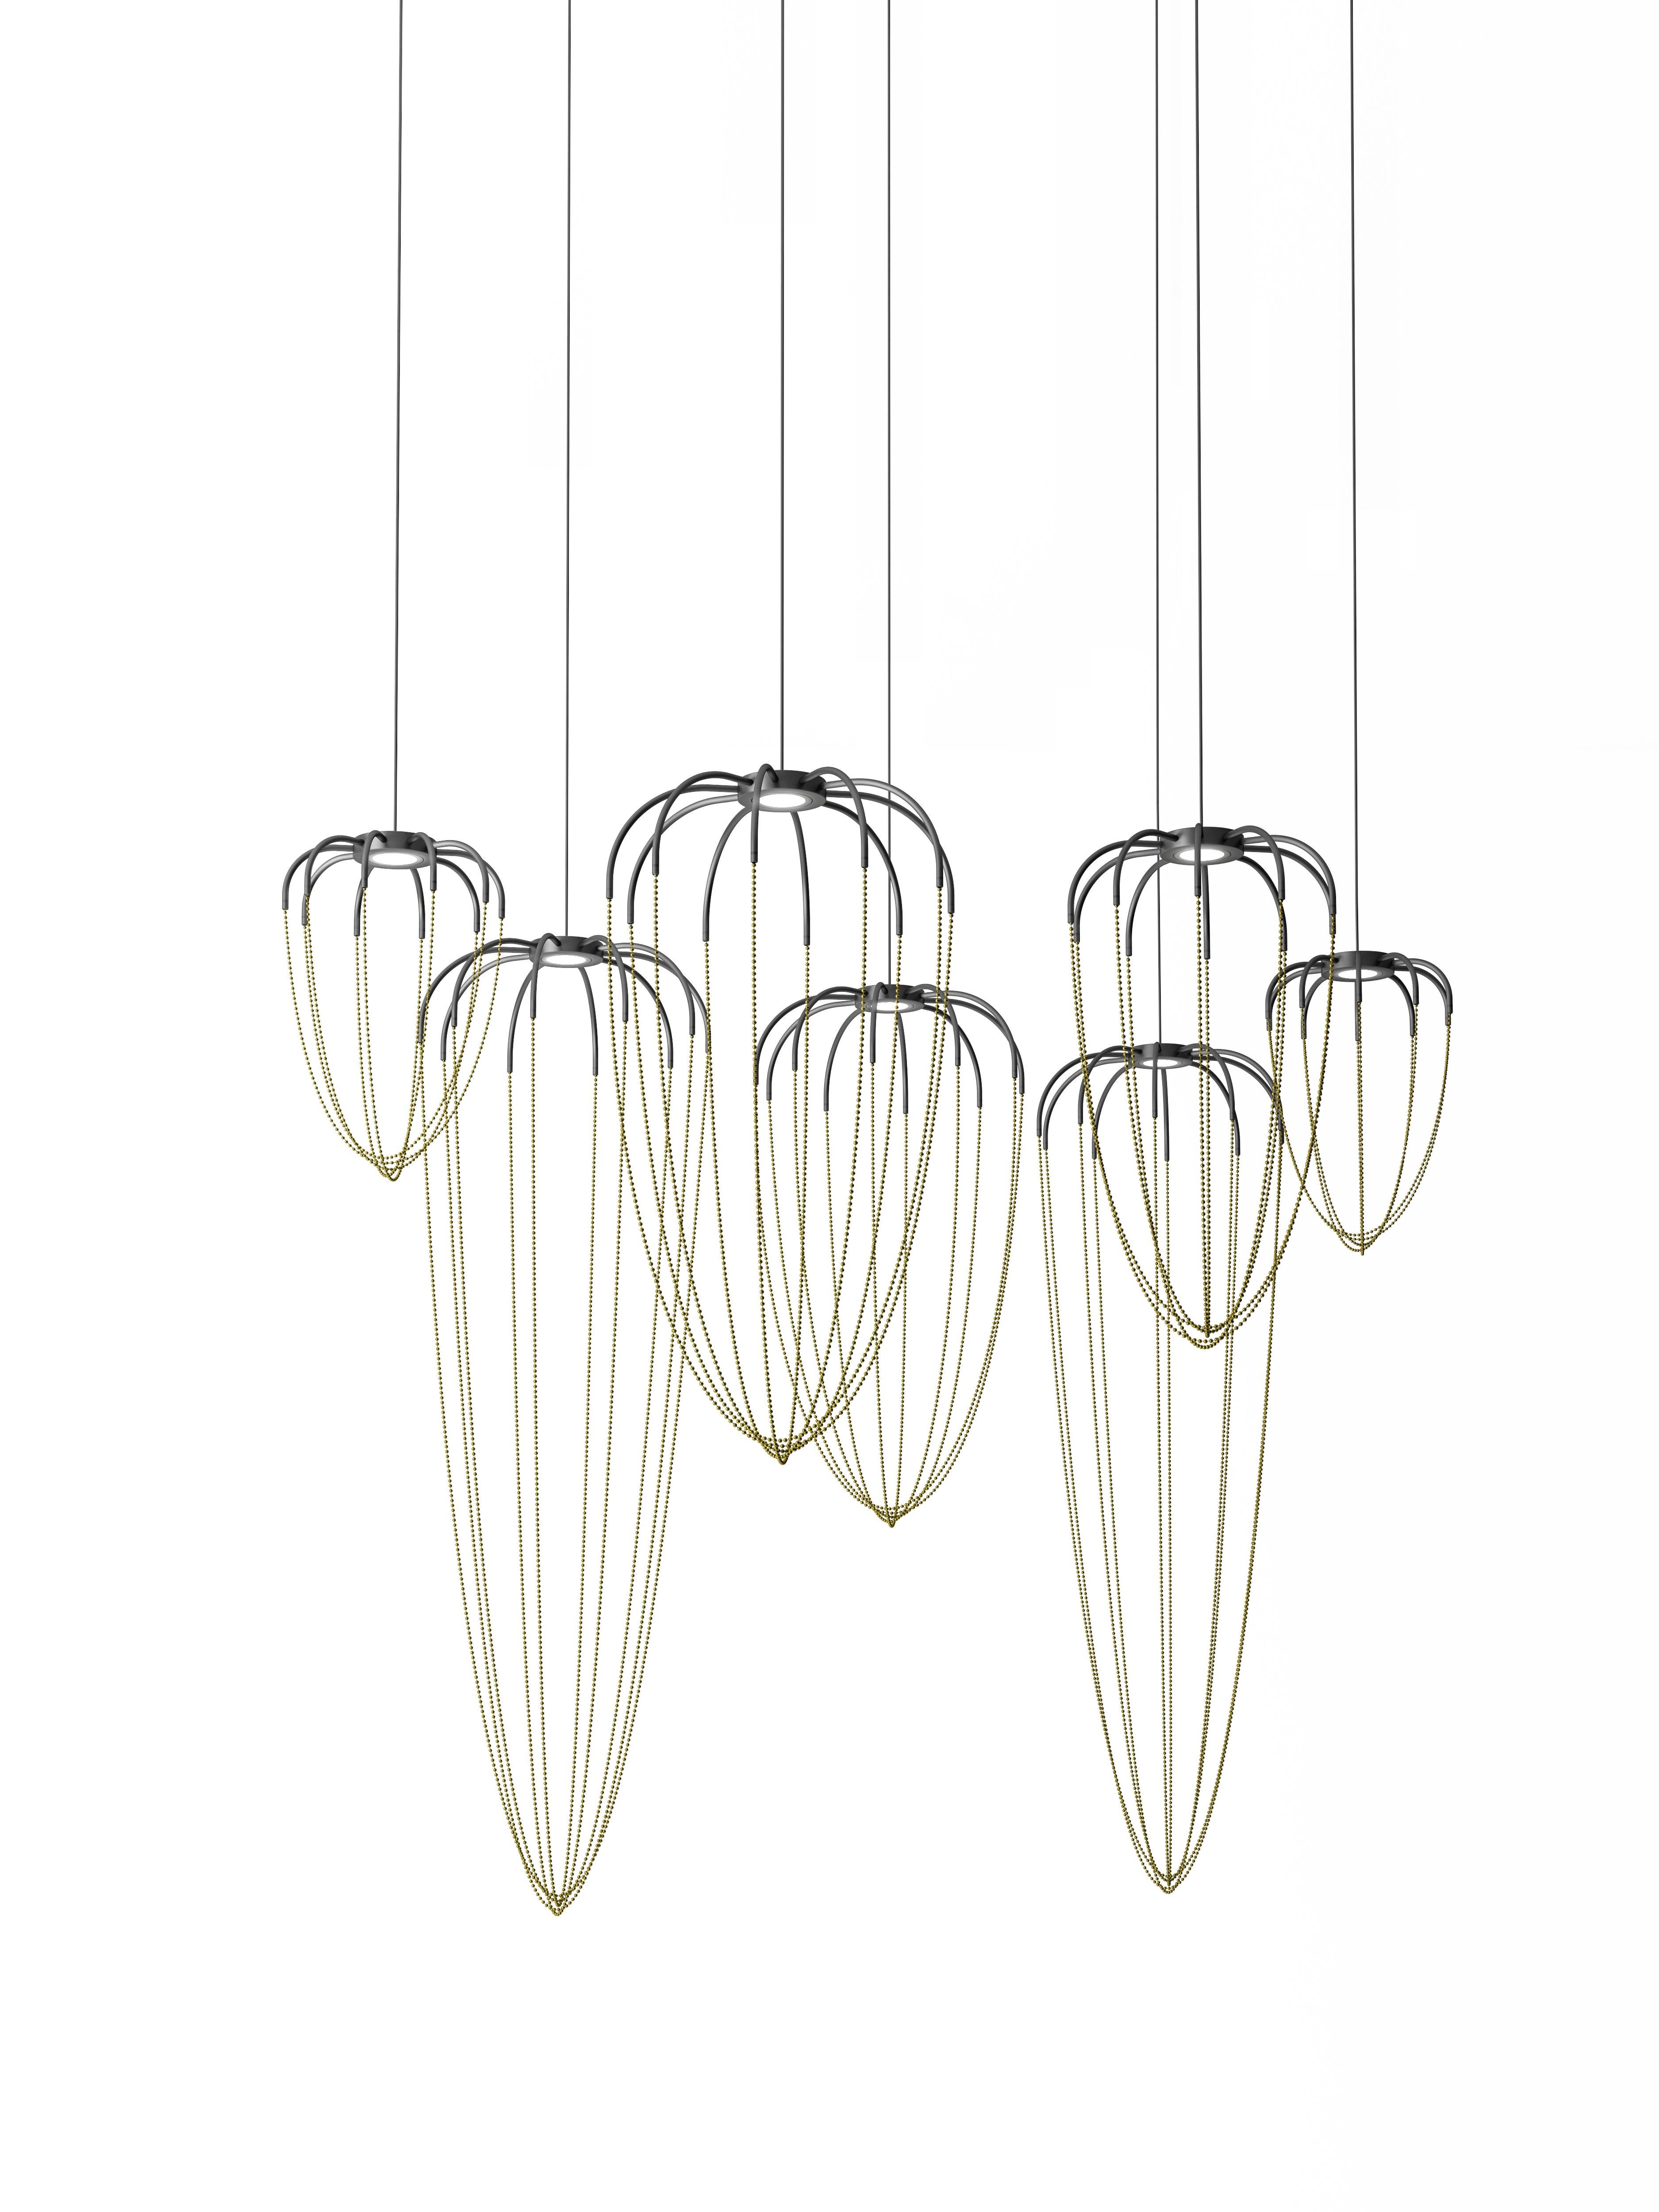 Axolight Alysoid Large Pendant Lamp in Anthracite Grey Aluminum Body with Brass Chains by Ryosuke Fukusada

Precious spherical details chase each other with soft elegance and compose open signs in space. The refined volume of Alysoid lets itself be